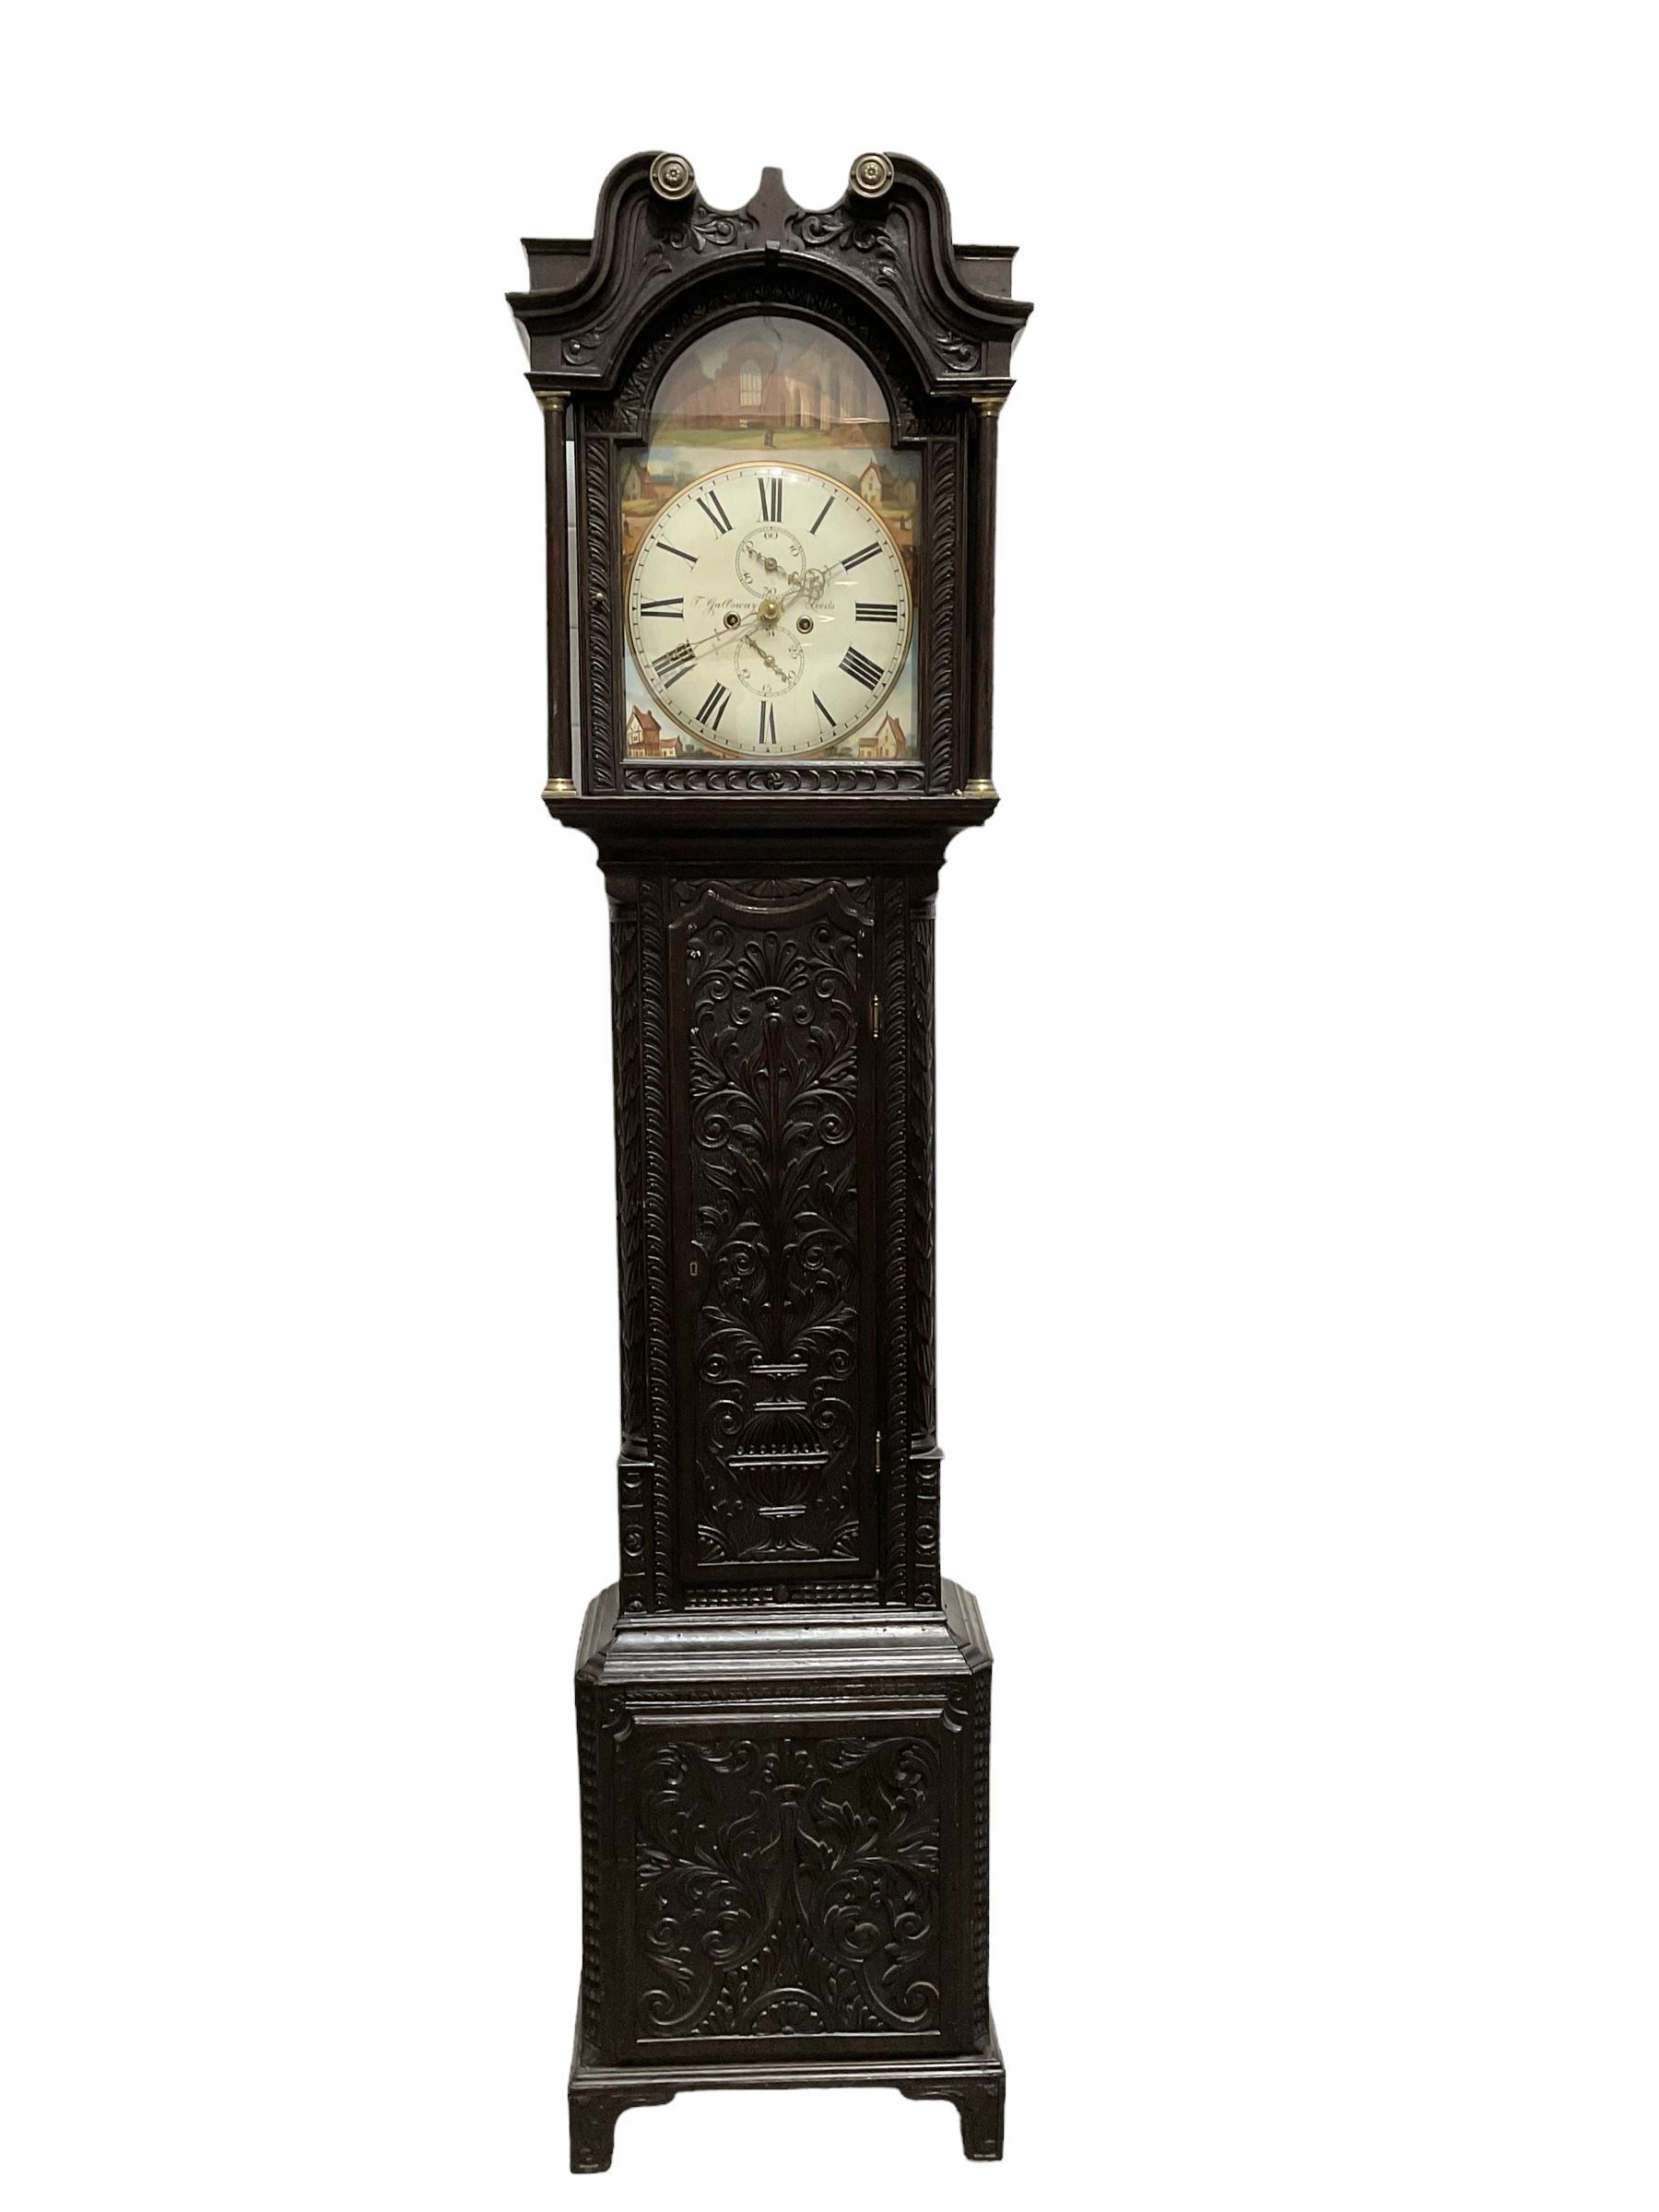 Carved 8-day oak longcase - dial inscribed J Galloway Leeds - Image 4 of 7